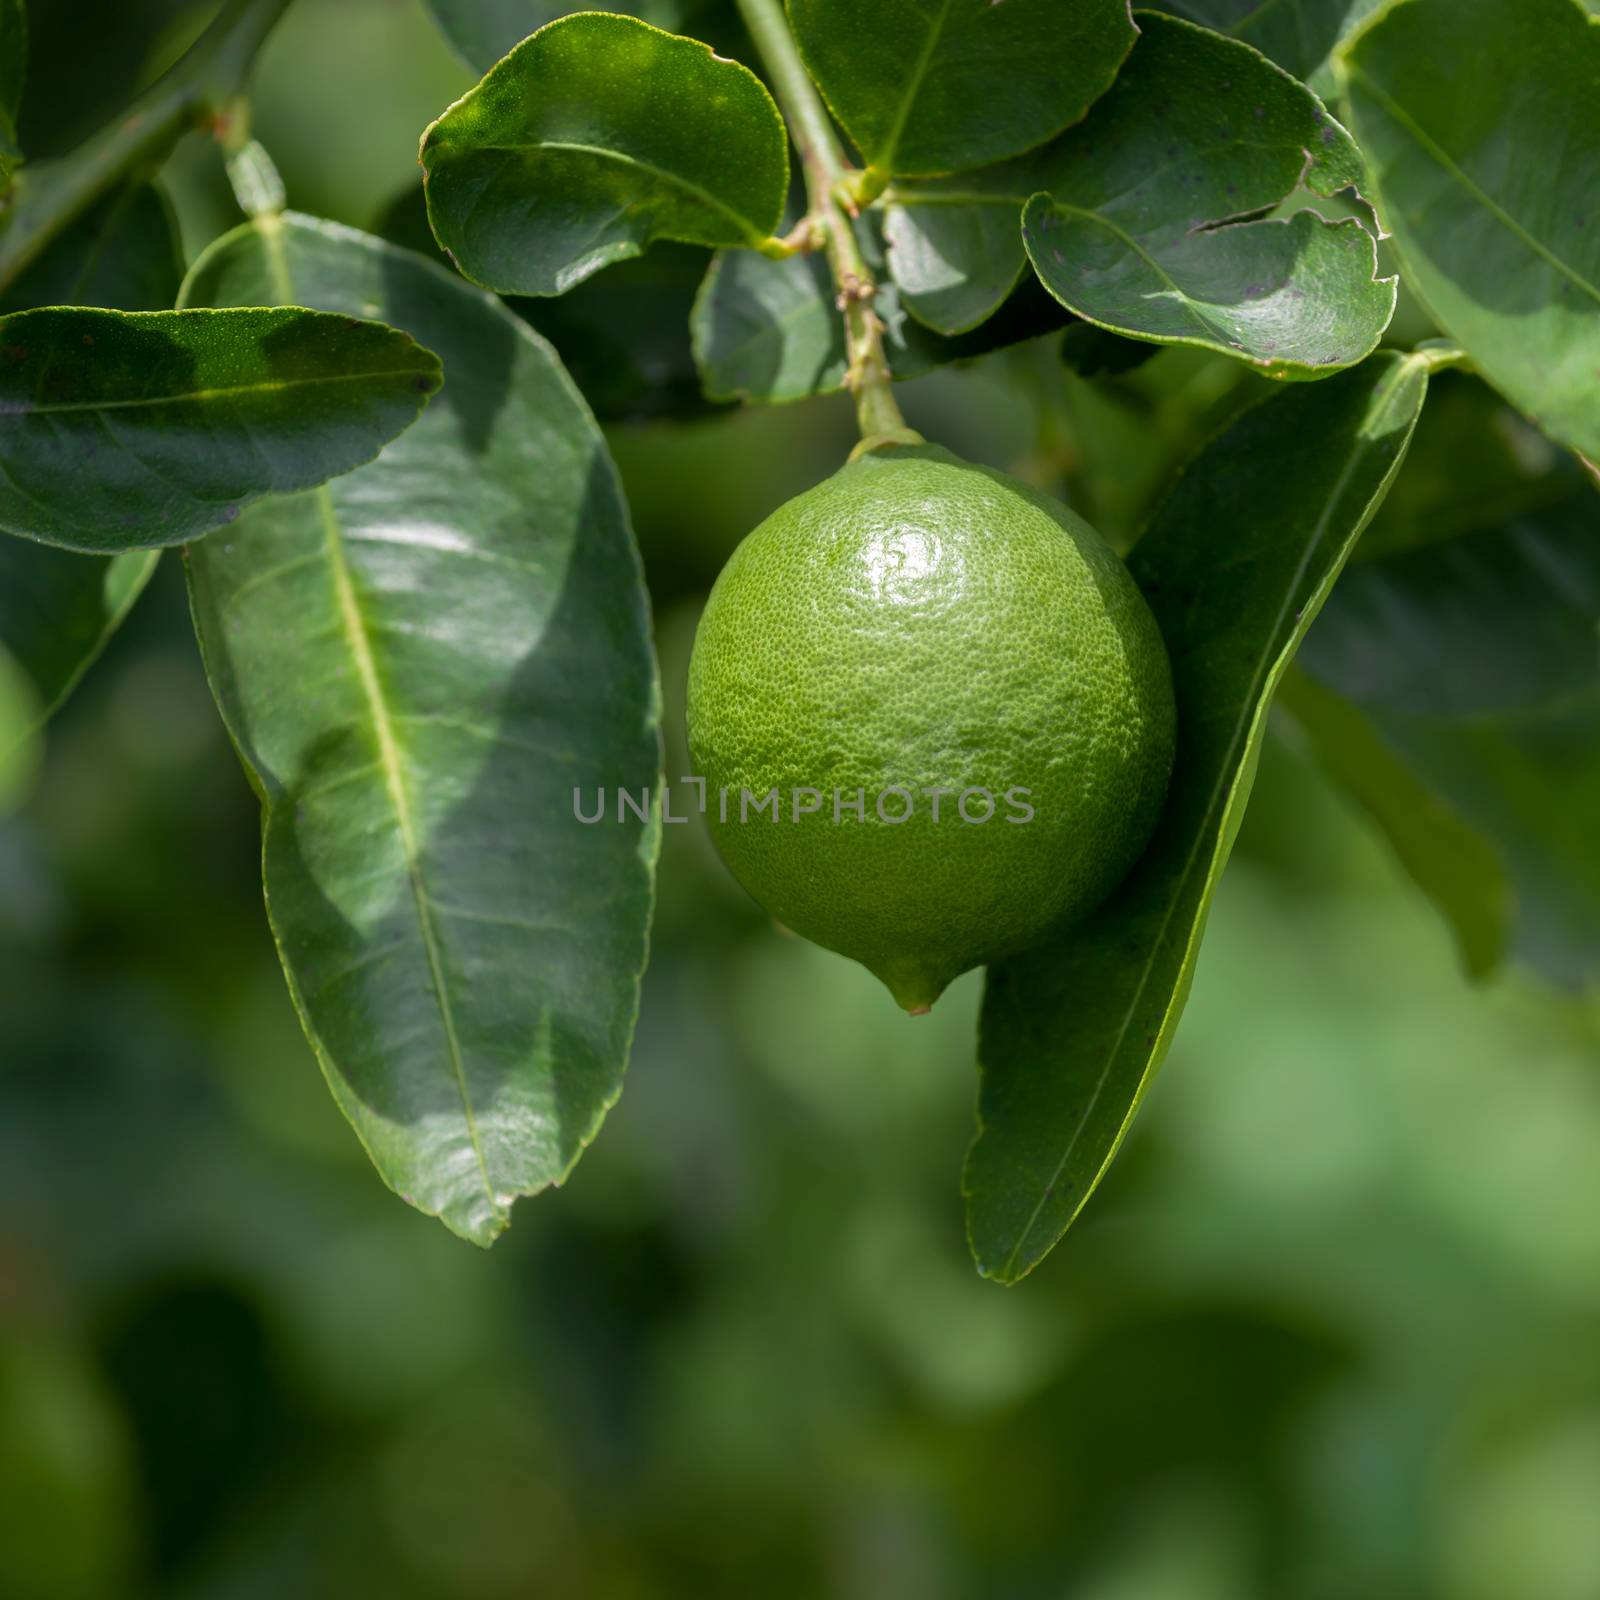 Lime tree and fresh green limes on the branch in the lime garden.